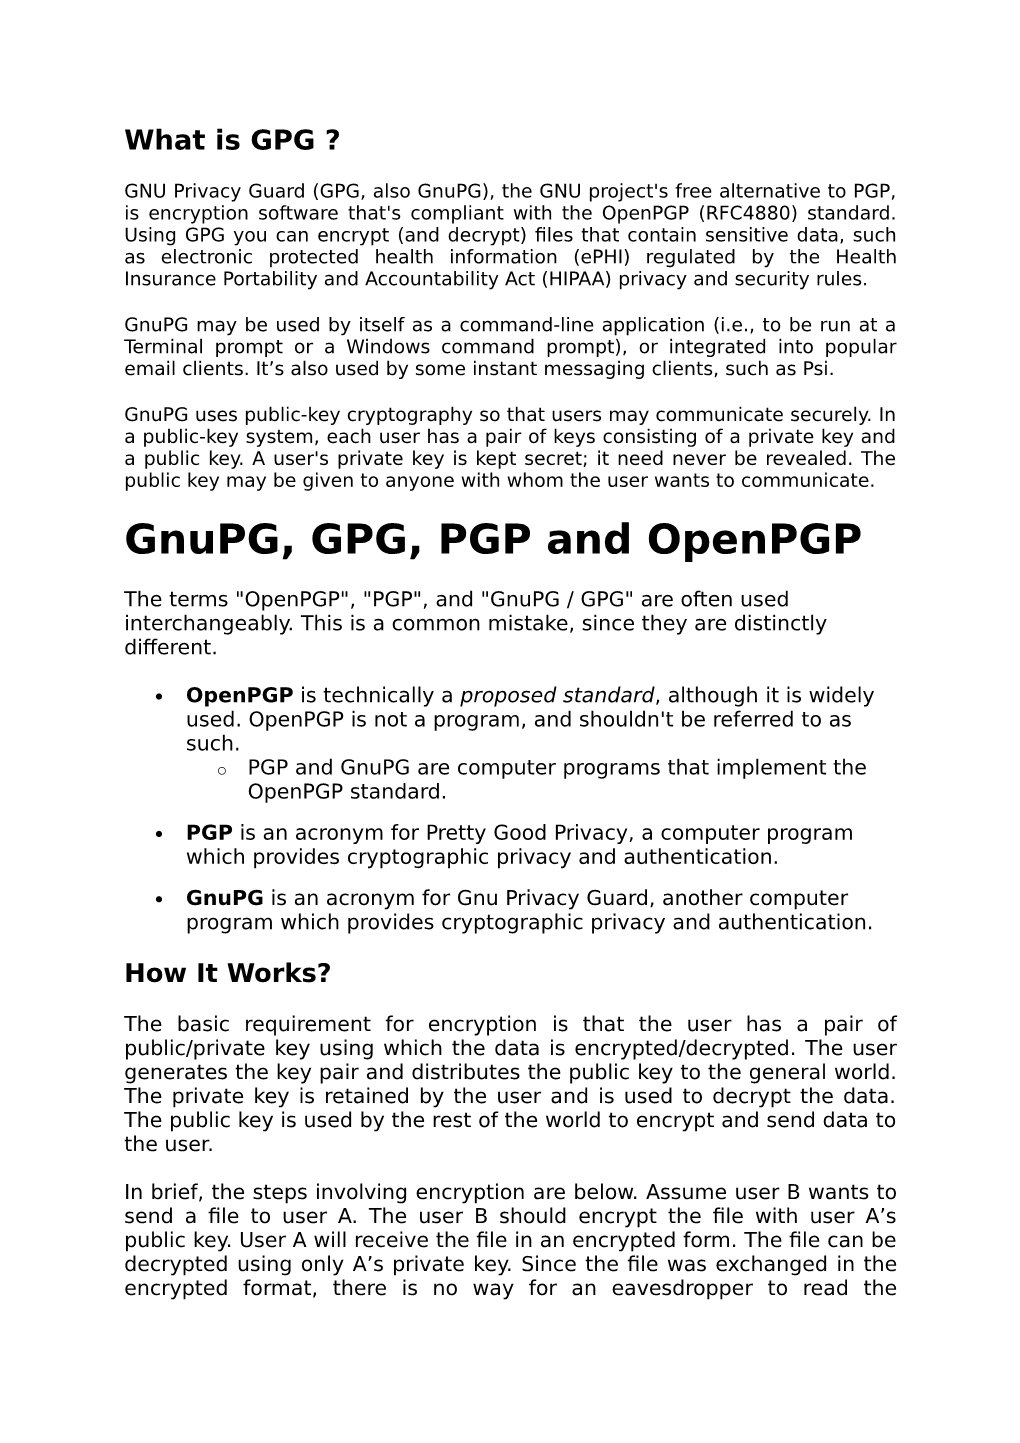 Gnupg, GPG, PGP and Openpgp